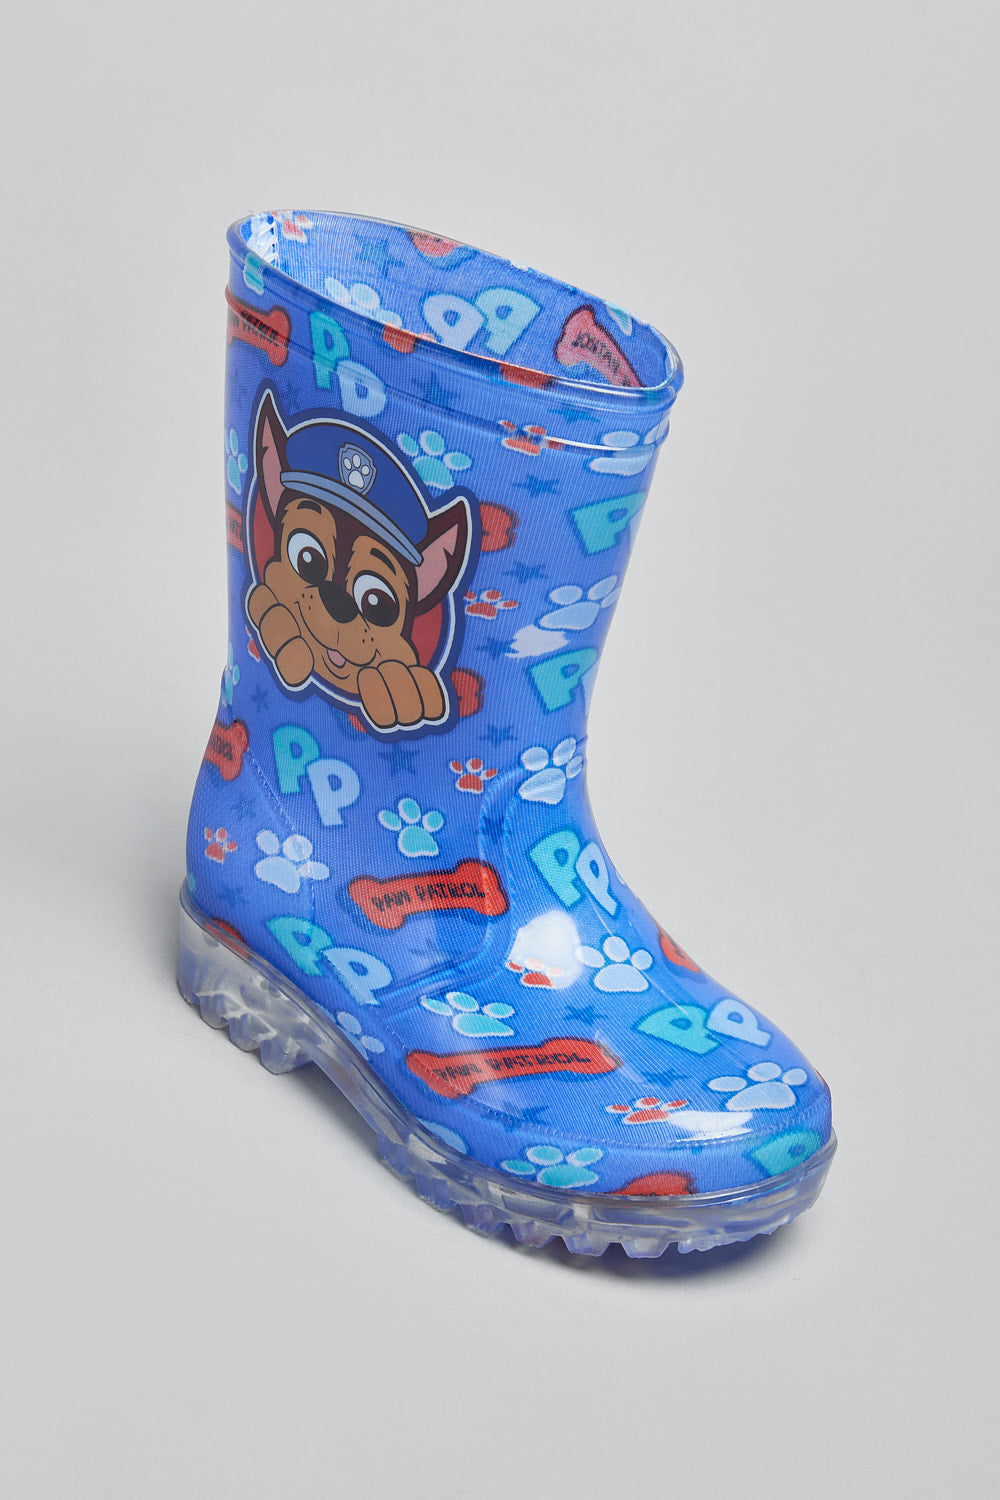 PAW PATROL MELICUS WELLY